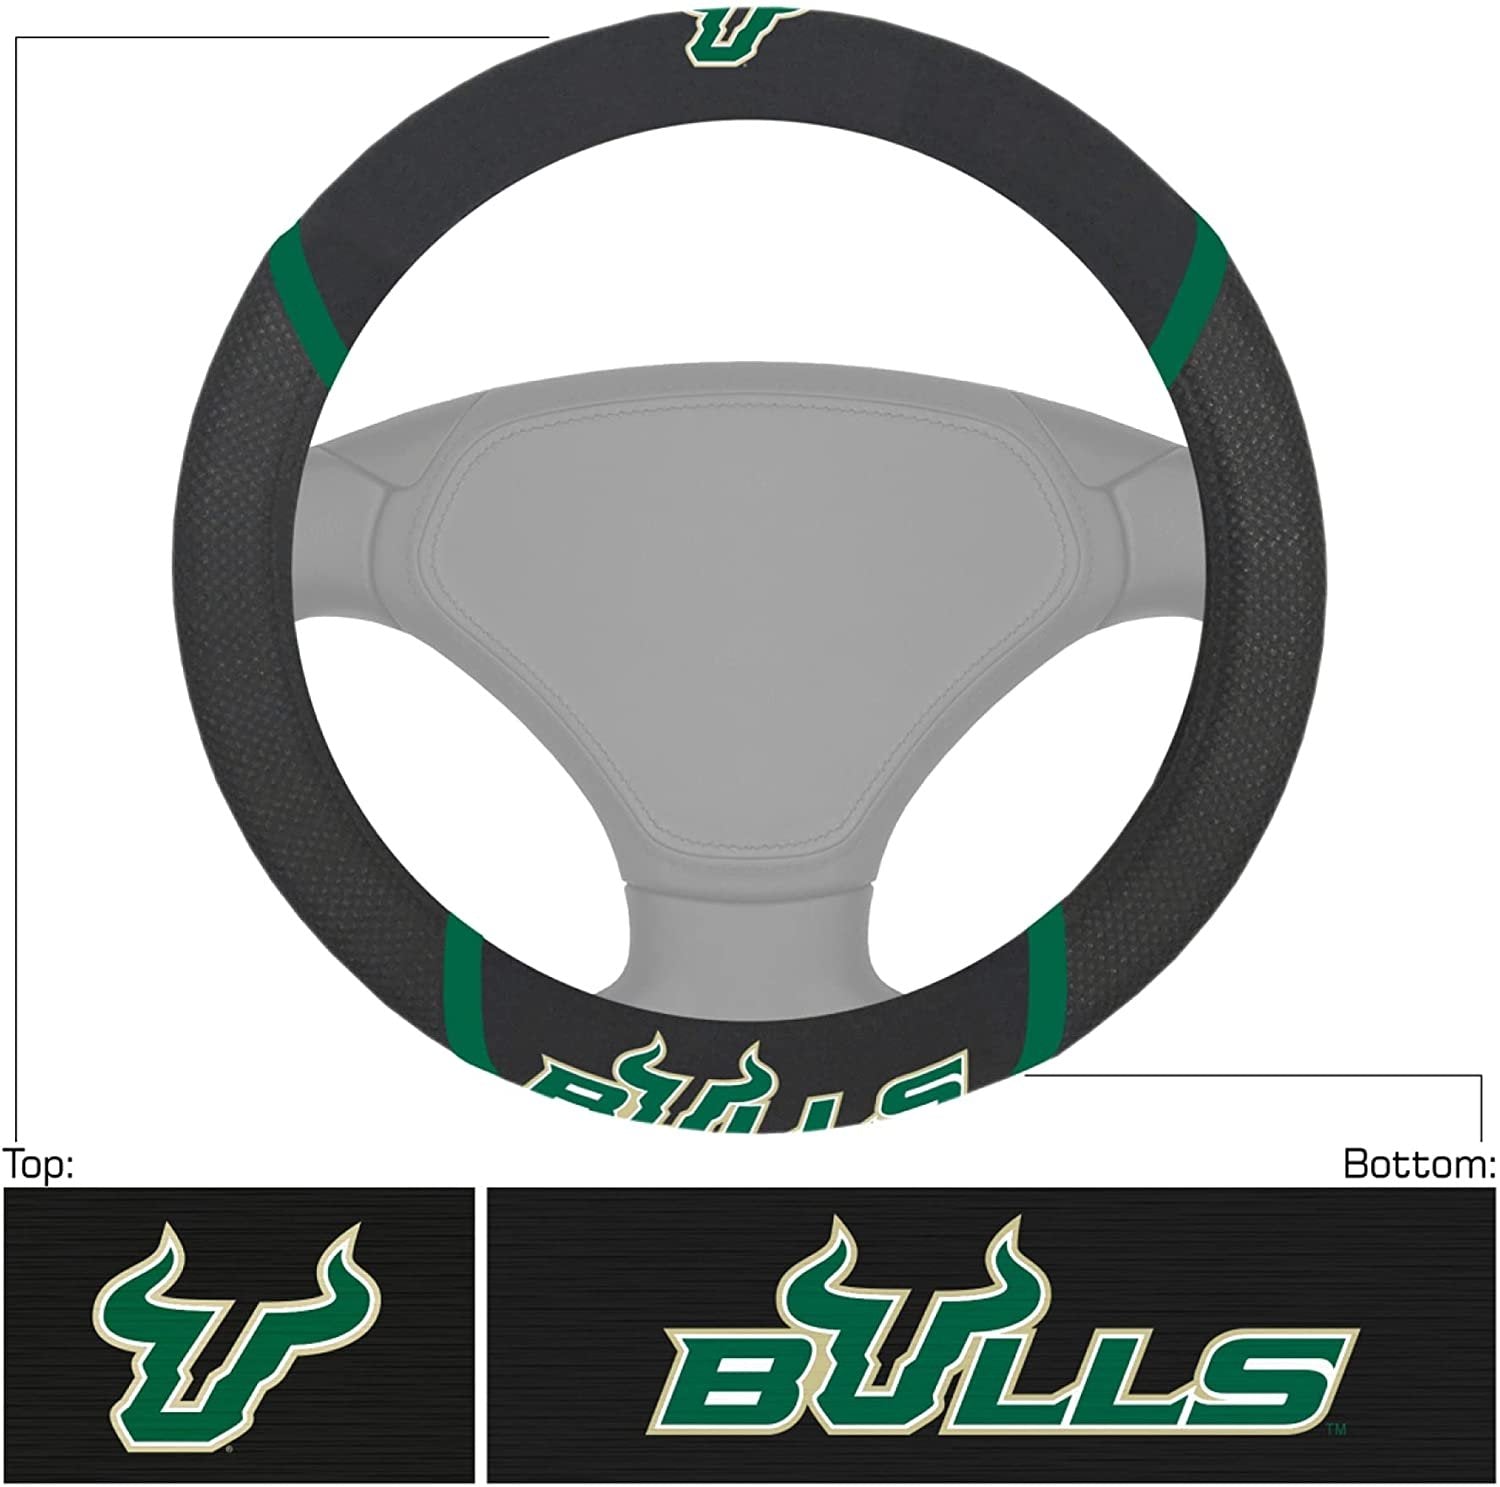 South Florida Bulls USF Steering Wheel Cover Premium Embroidered Black 15 Inch University of